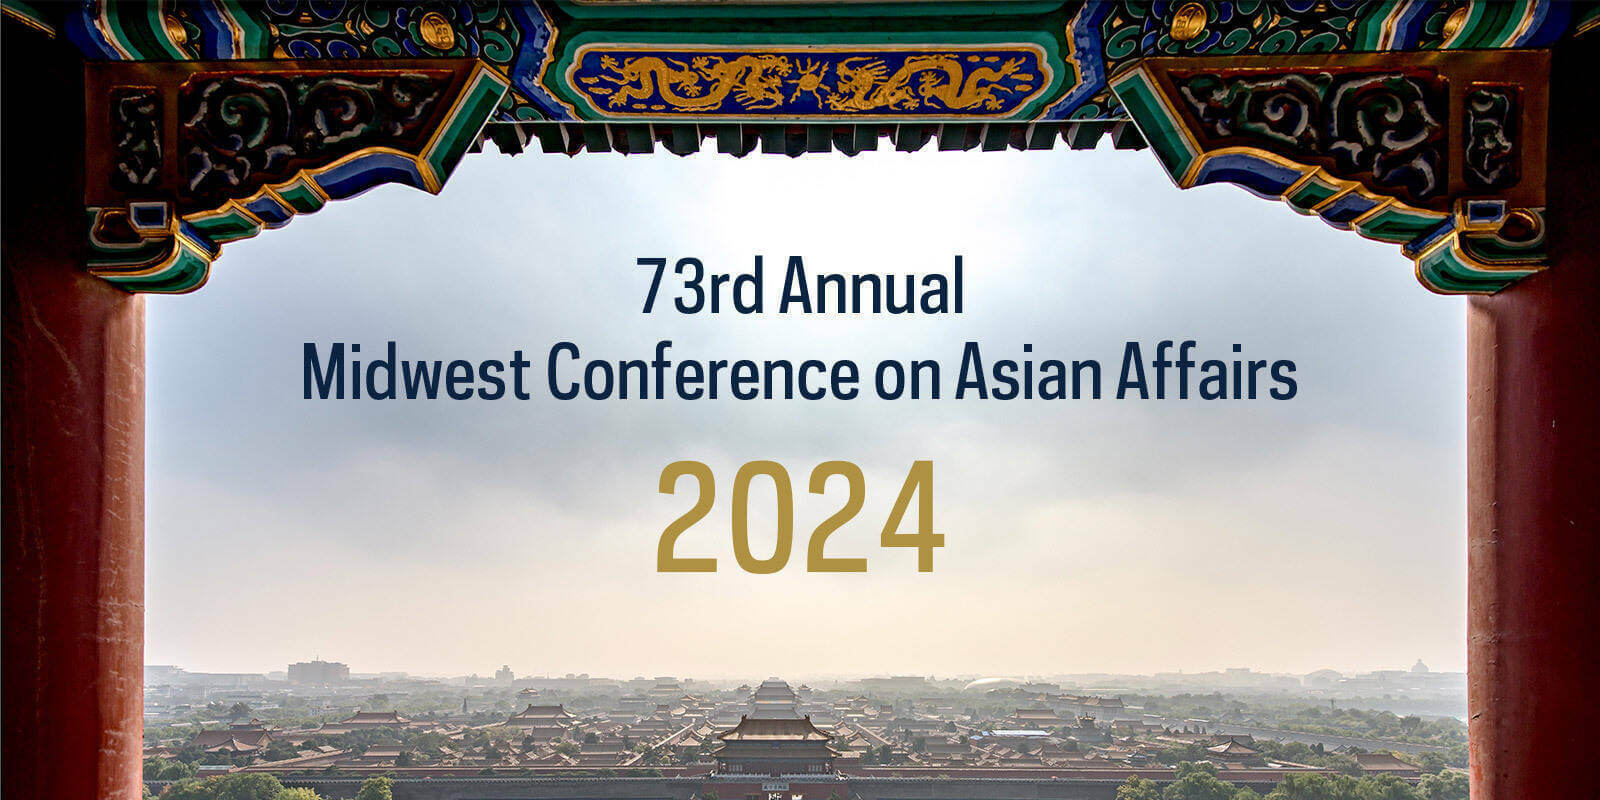 73rd Annual Midwest Conference on Asian Affairs 2024 at the University of Notre Dame